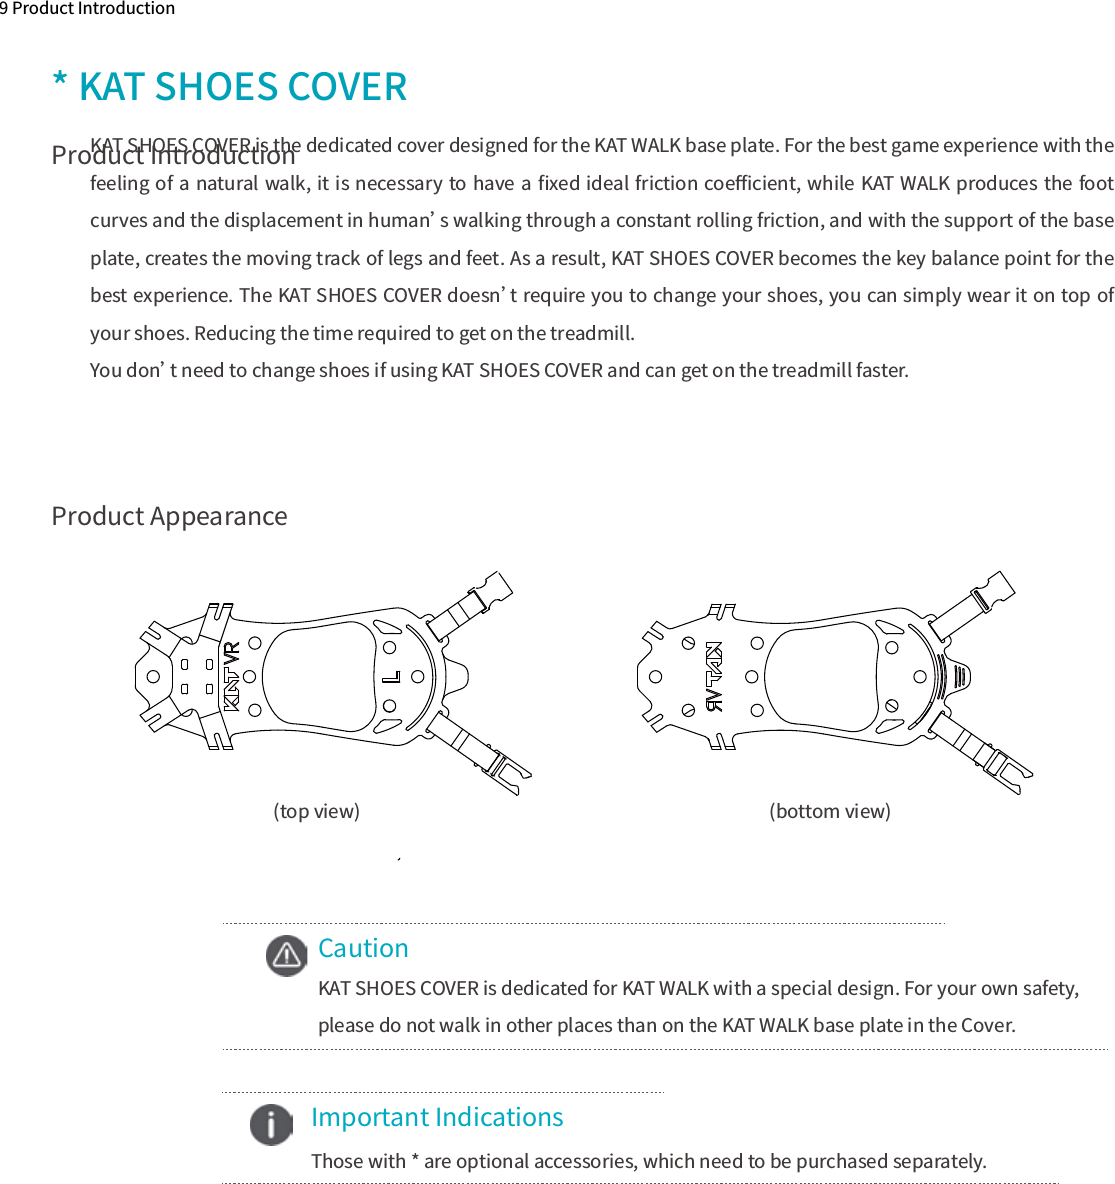 Product Appearance9 Product Introduction* KAT SHOES COVERKAT SHOES COVER is the dedicated cover designed for the KAT WALK base plate. For the best game experience with the feeling of a natural walk, it is necessary to have a ﬁxed ideal friction coeﬃcient, while KAT WALK produces the foot curves and the displacement in human’s walking through a constant rolling friction, and with the support of the base plate, creates the moving track of legs and feet. As a result, KAT SHOES COVER becomes the key balance point for the best experience. The KAT SHOES COVER doesn’t require you to change your shoes, you can simply wear it on top of your shoes. Reducing the time required to get on the treadmill.You don’t need to change shoes if using KAT SHOES COVER and can get on the treadmill faster. (bottom view)(top view)CautionKAT SHOES COVER is dedicated for KAT WALK with a special design. For your own safety, please do not walk in other places than on the KAT WALK base plate in the Cover.    Important Indications  Those with * are optional accessories, which need to be purchased separately.Product Introduction